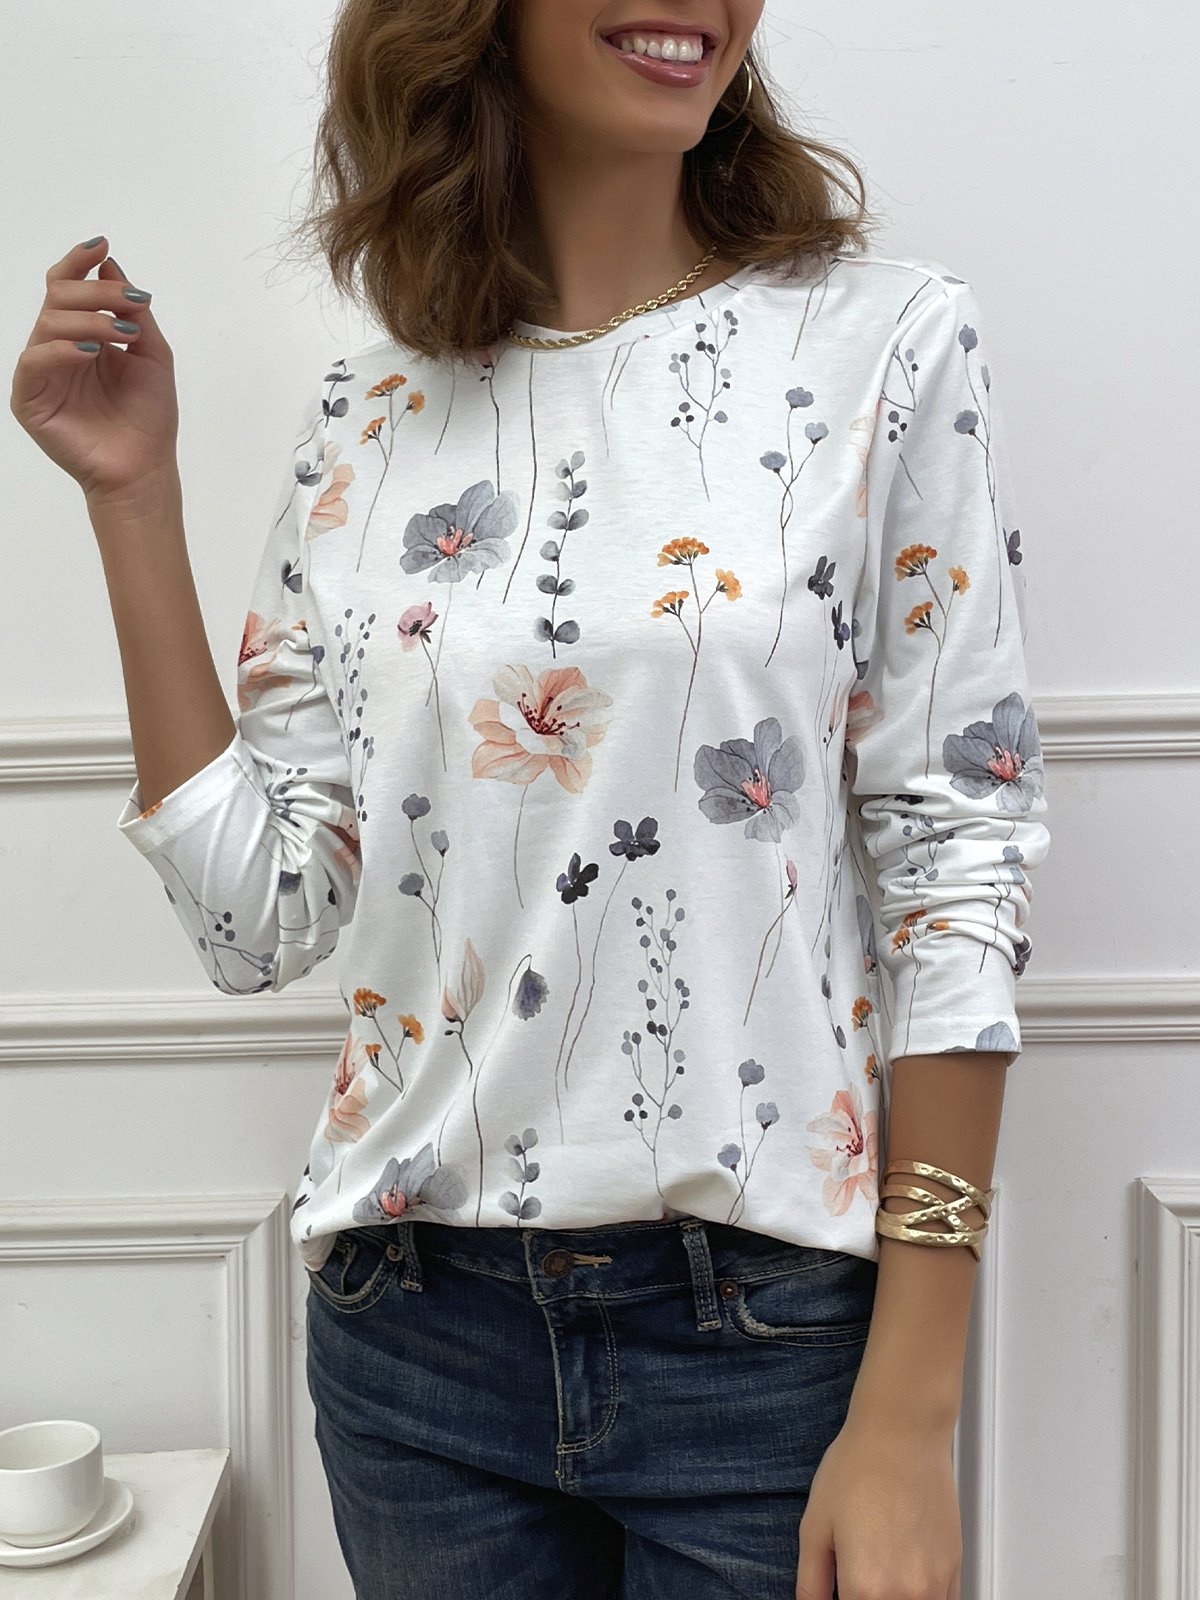 Women's Floral T-Shirt Country Casual Crewneck Knit Long Sleeve Tops